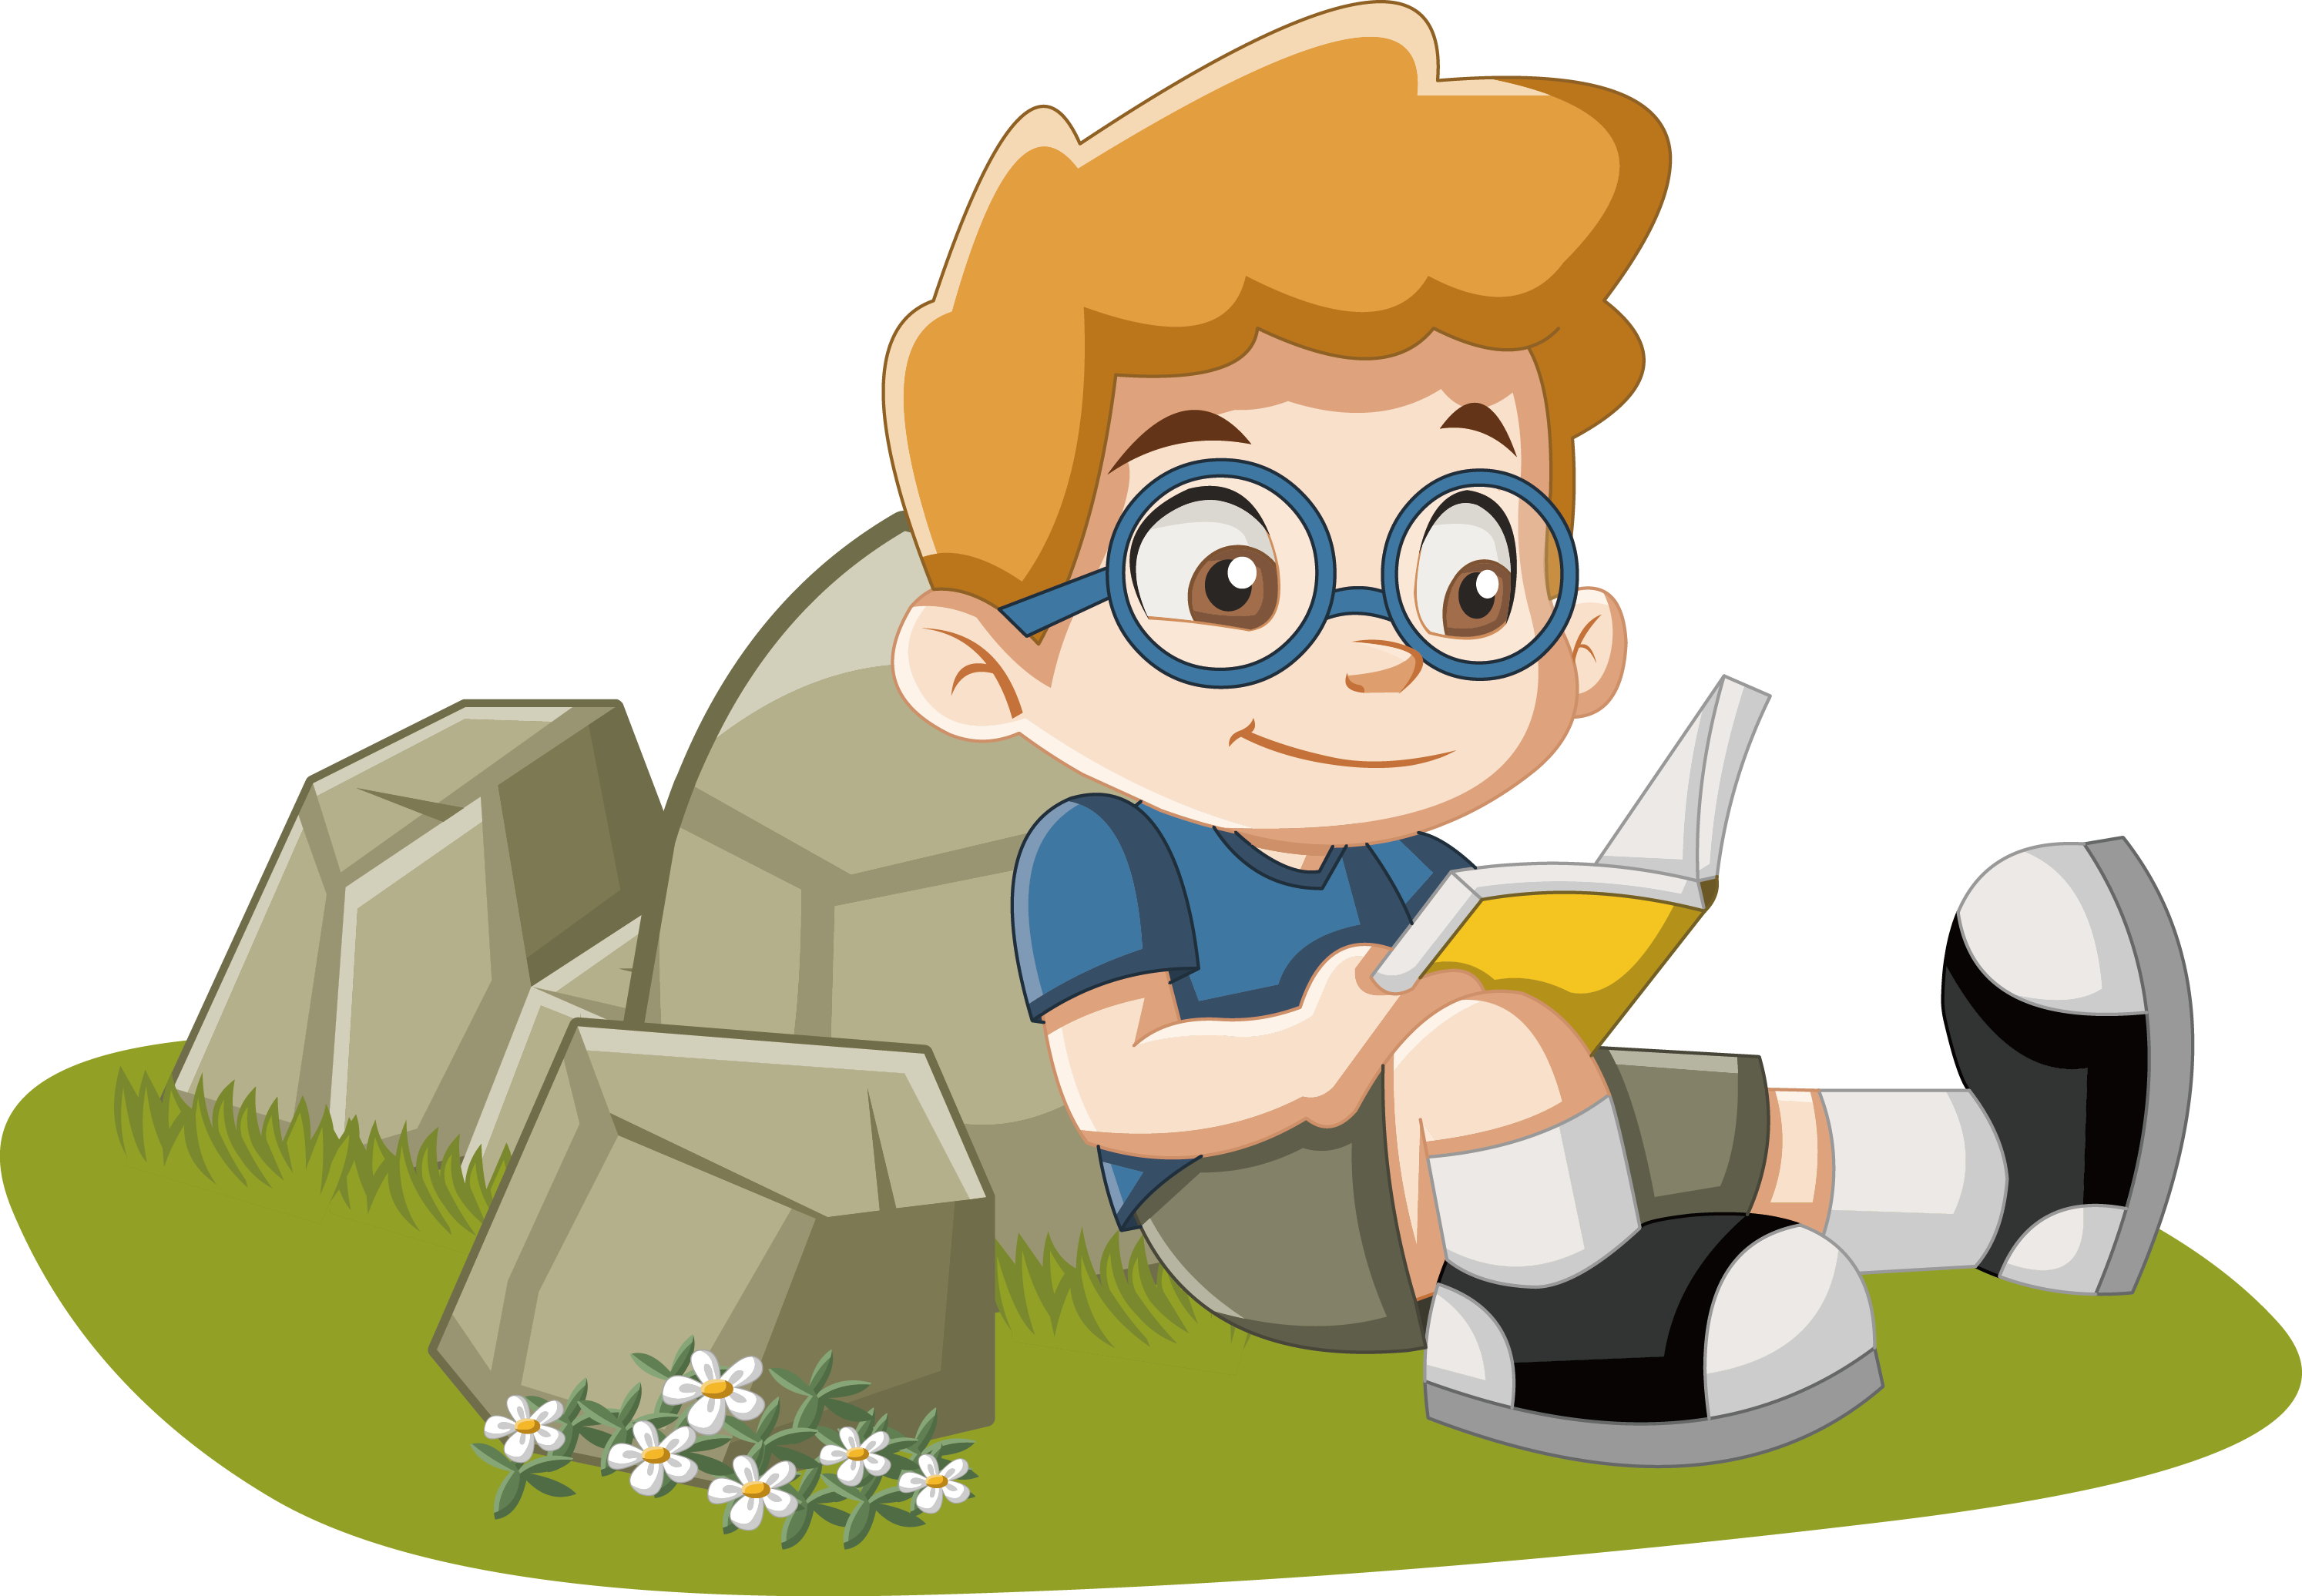 Child Cartoon - Reading a book sitting on the grass little boy png